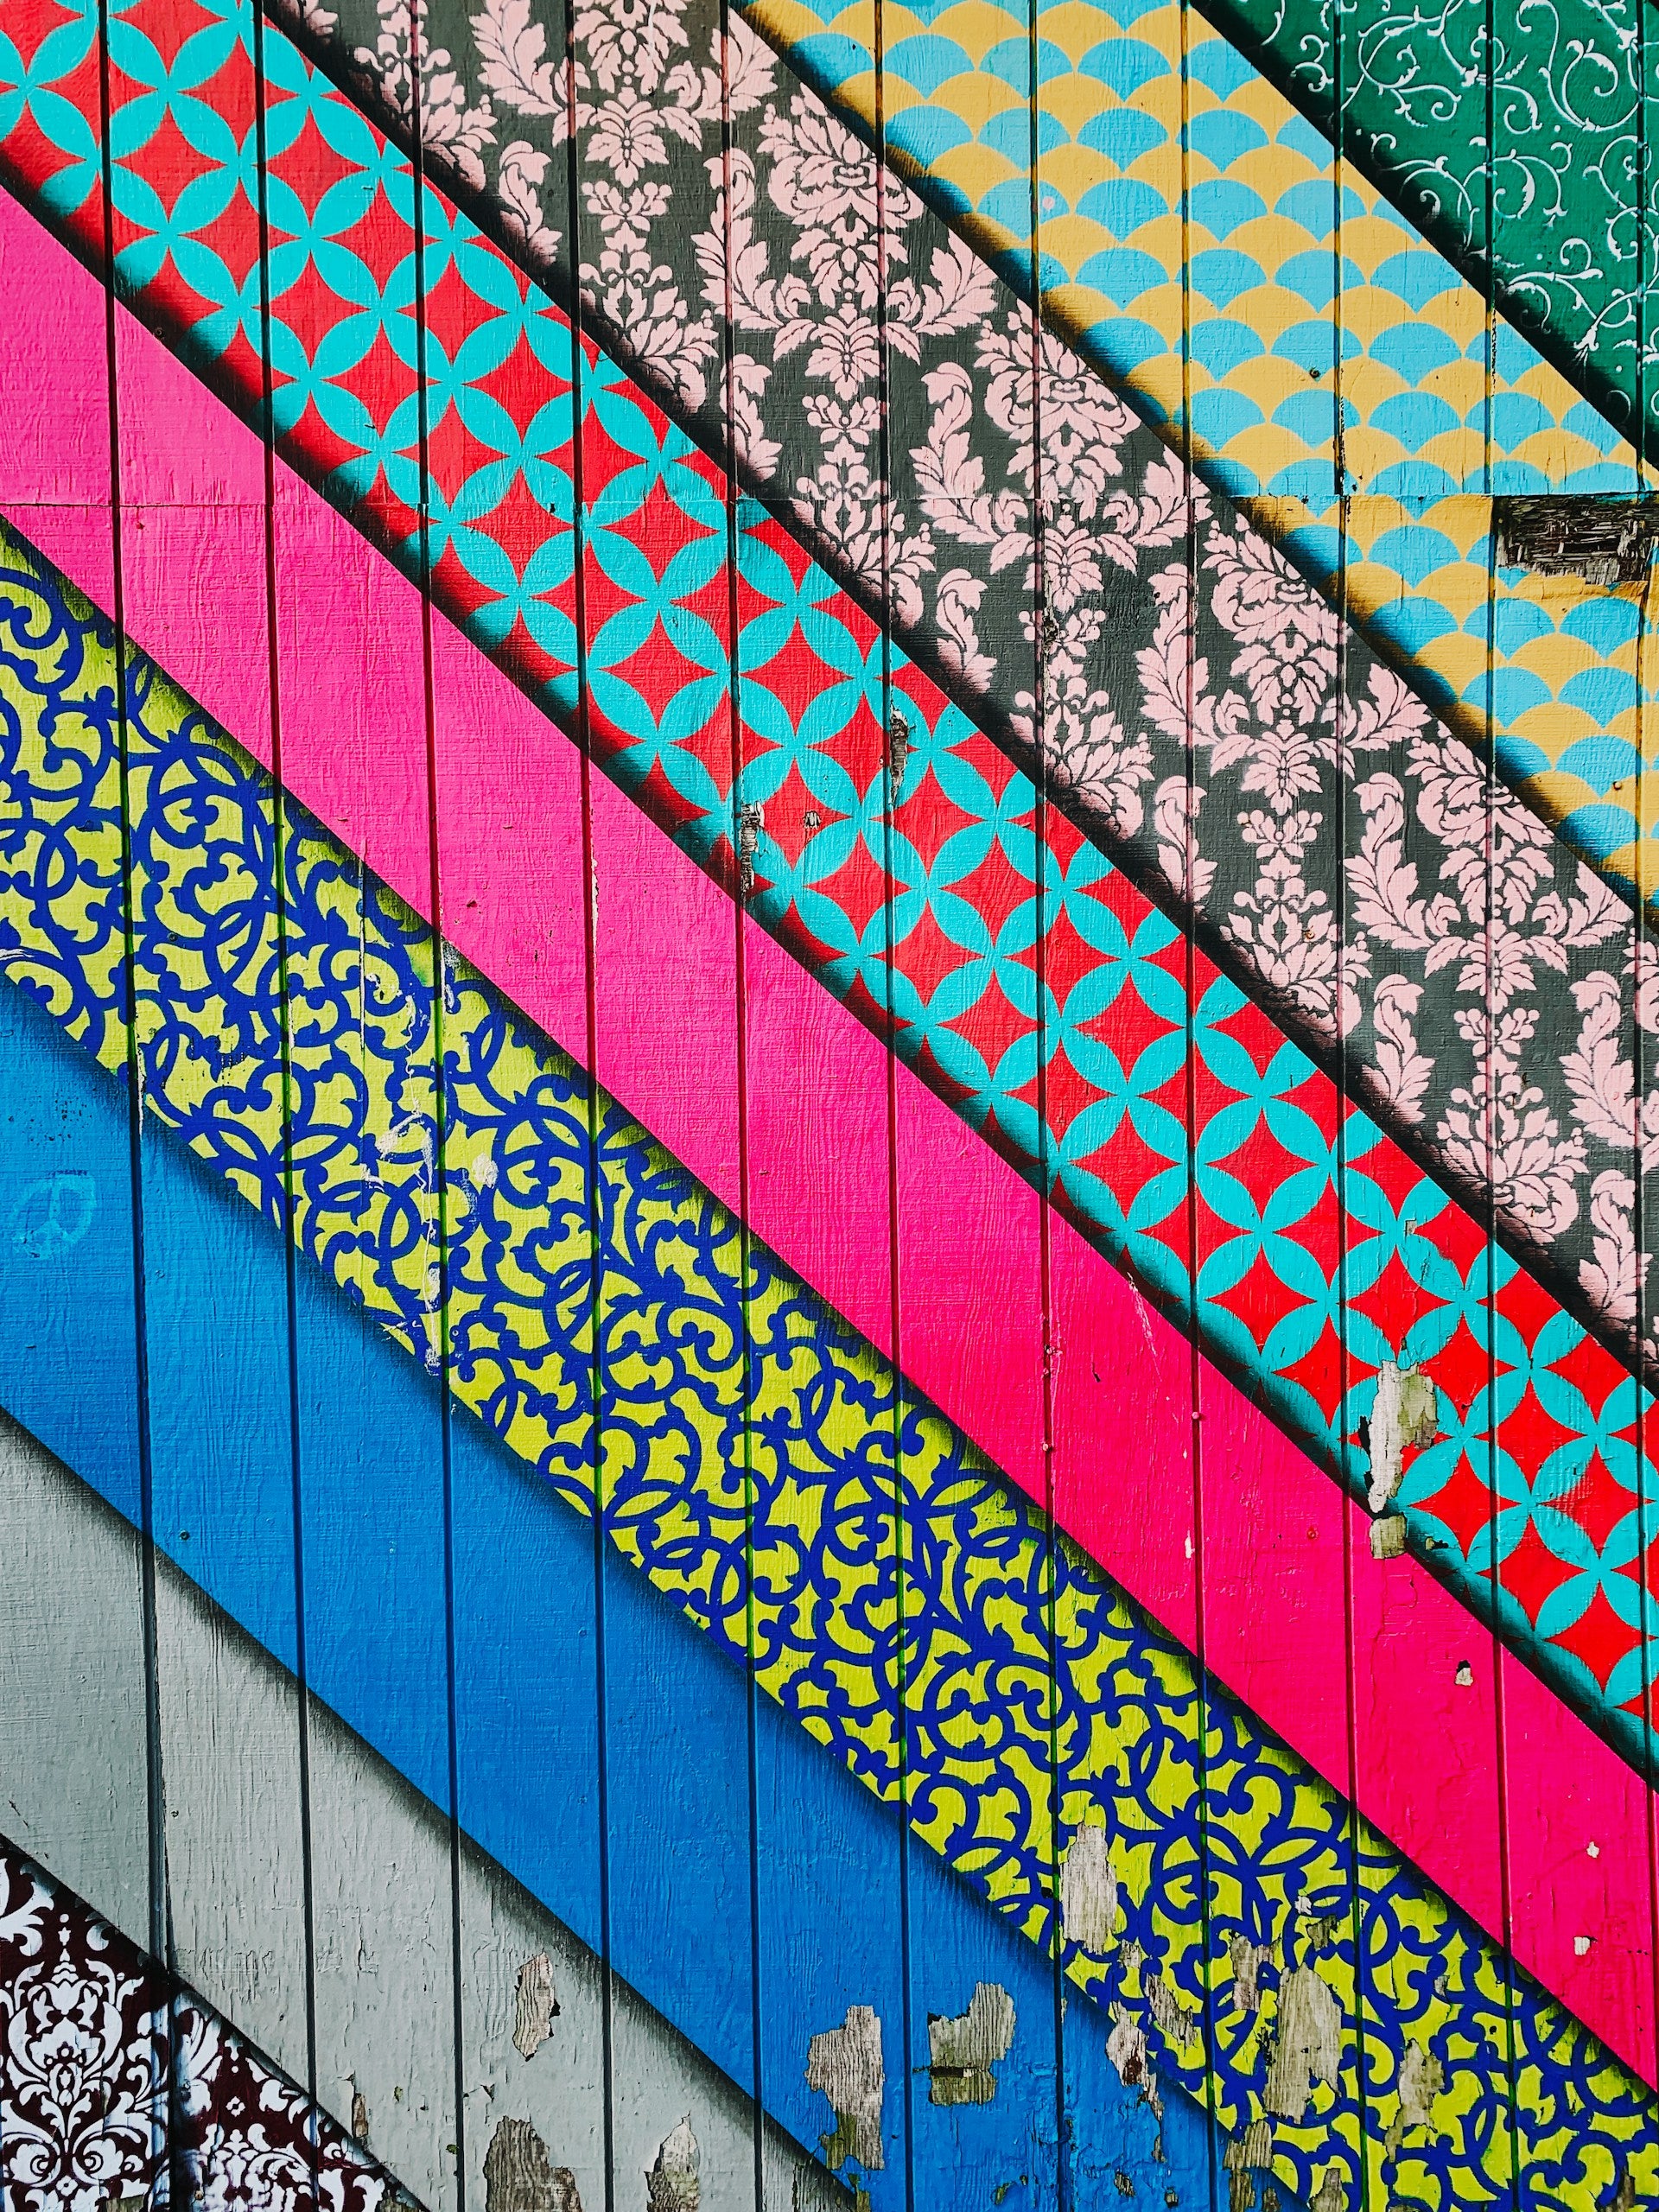 A colorful wall with many different designs on it.